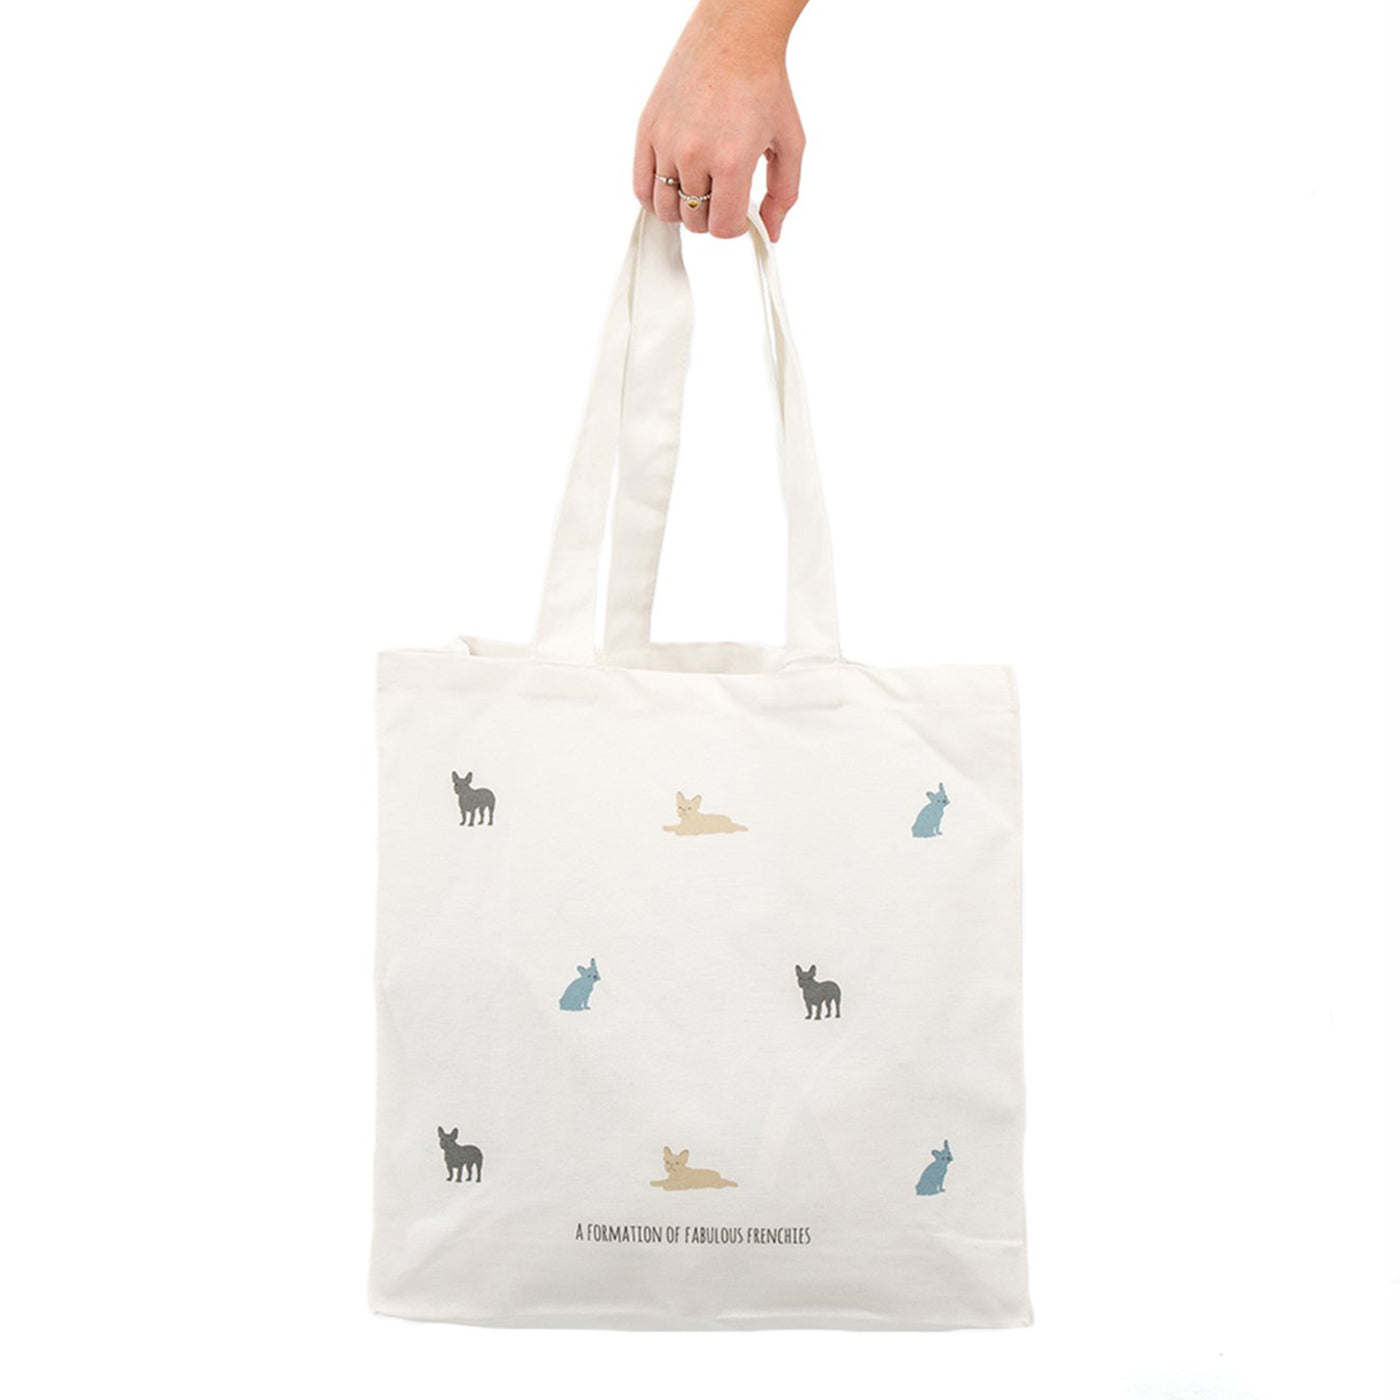 Fabulous Frenchies Canvas Tote Bag | Lords & Labradors Tote Bag